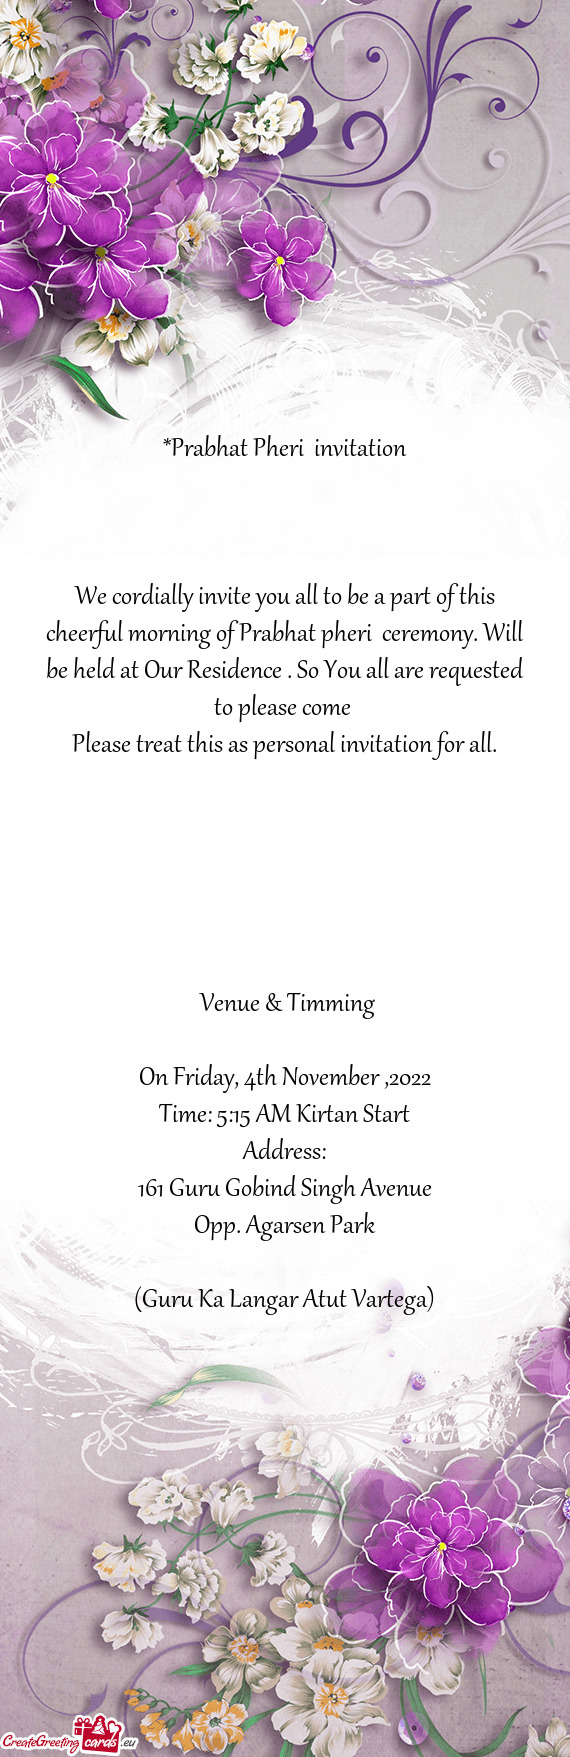 We cordially invite you all to be a part of this cheerful morning of Prabhat pheri ceremony. Will b